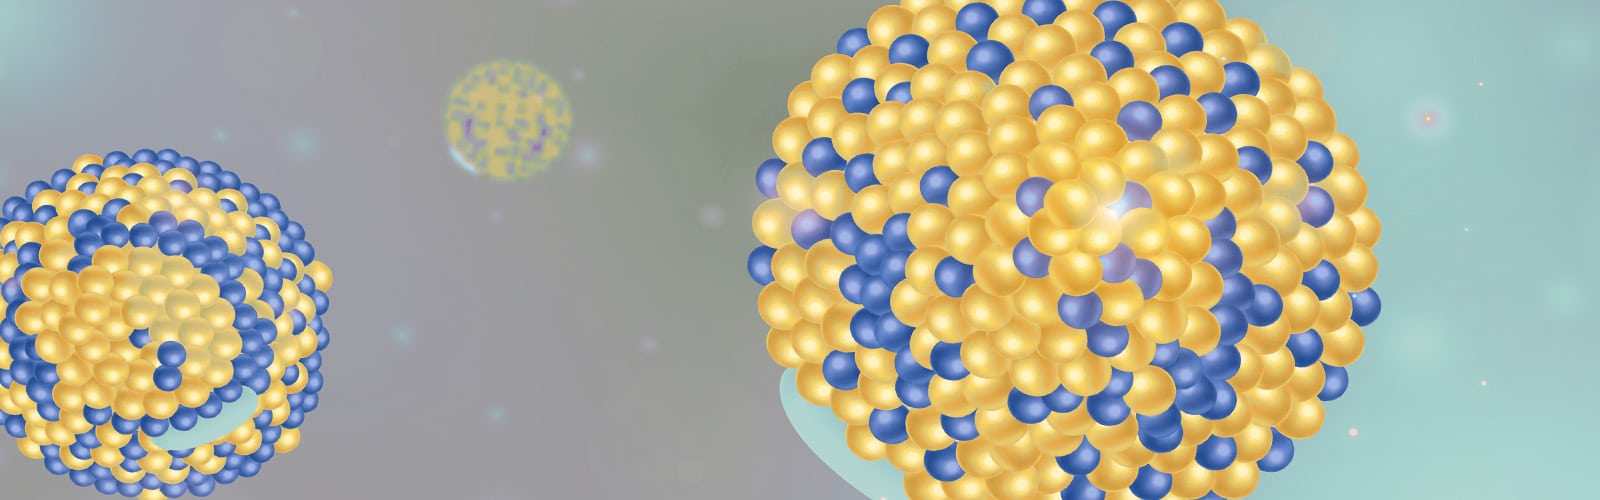 SAXS as a tool to study Lipid Nanoparticles